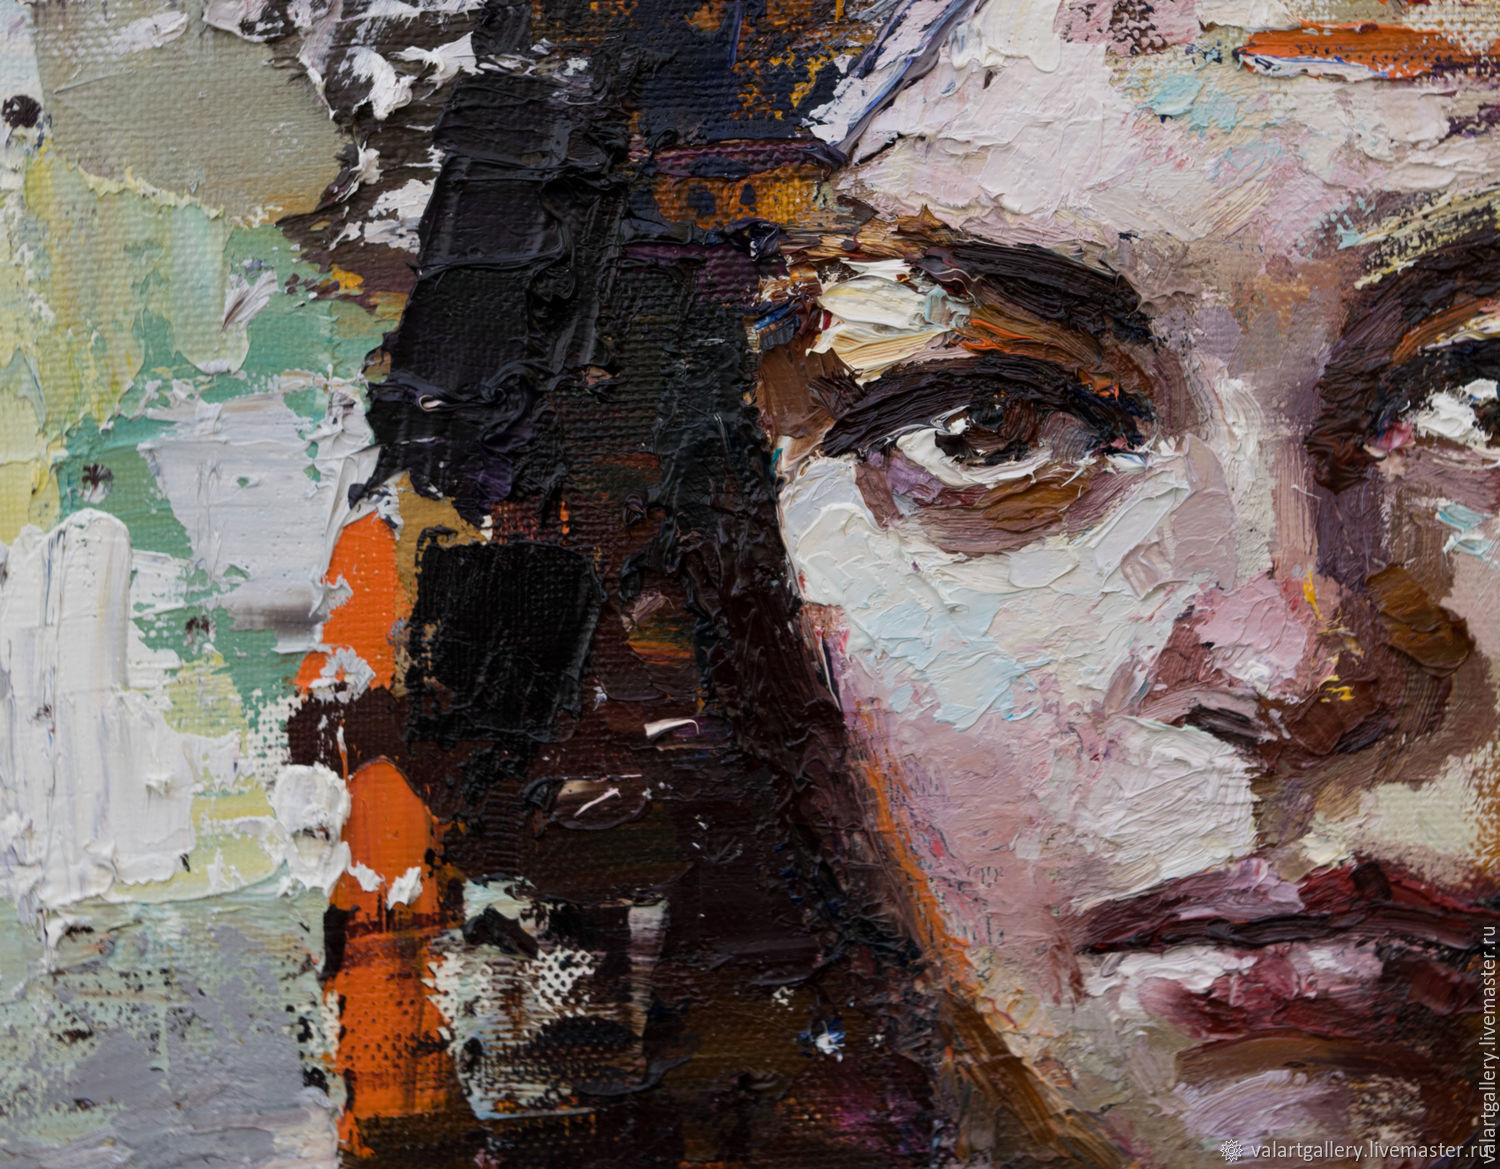 Abstract woman portrait painting, Original oil painting